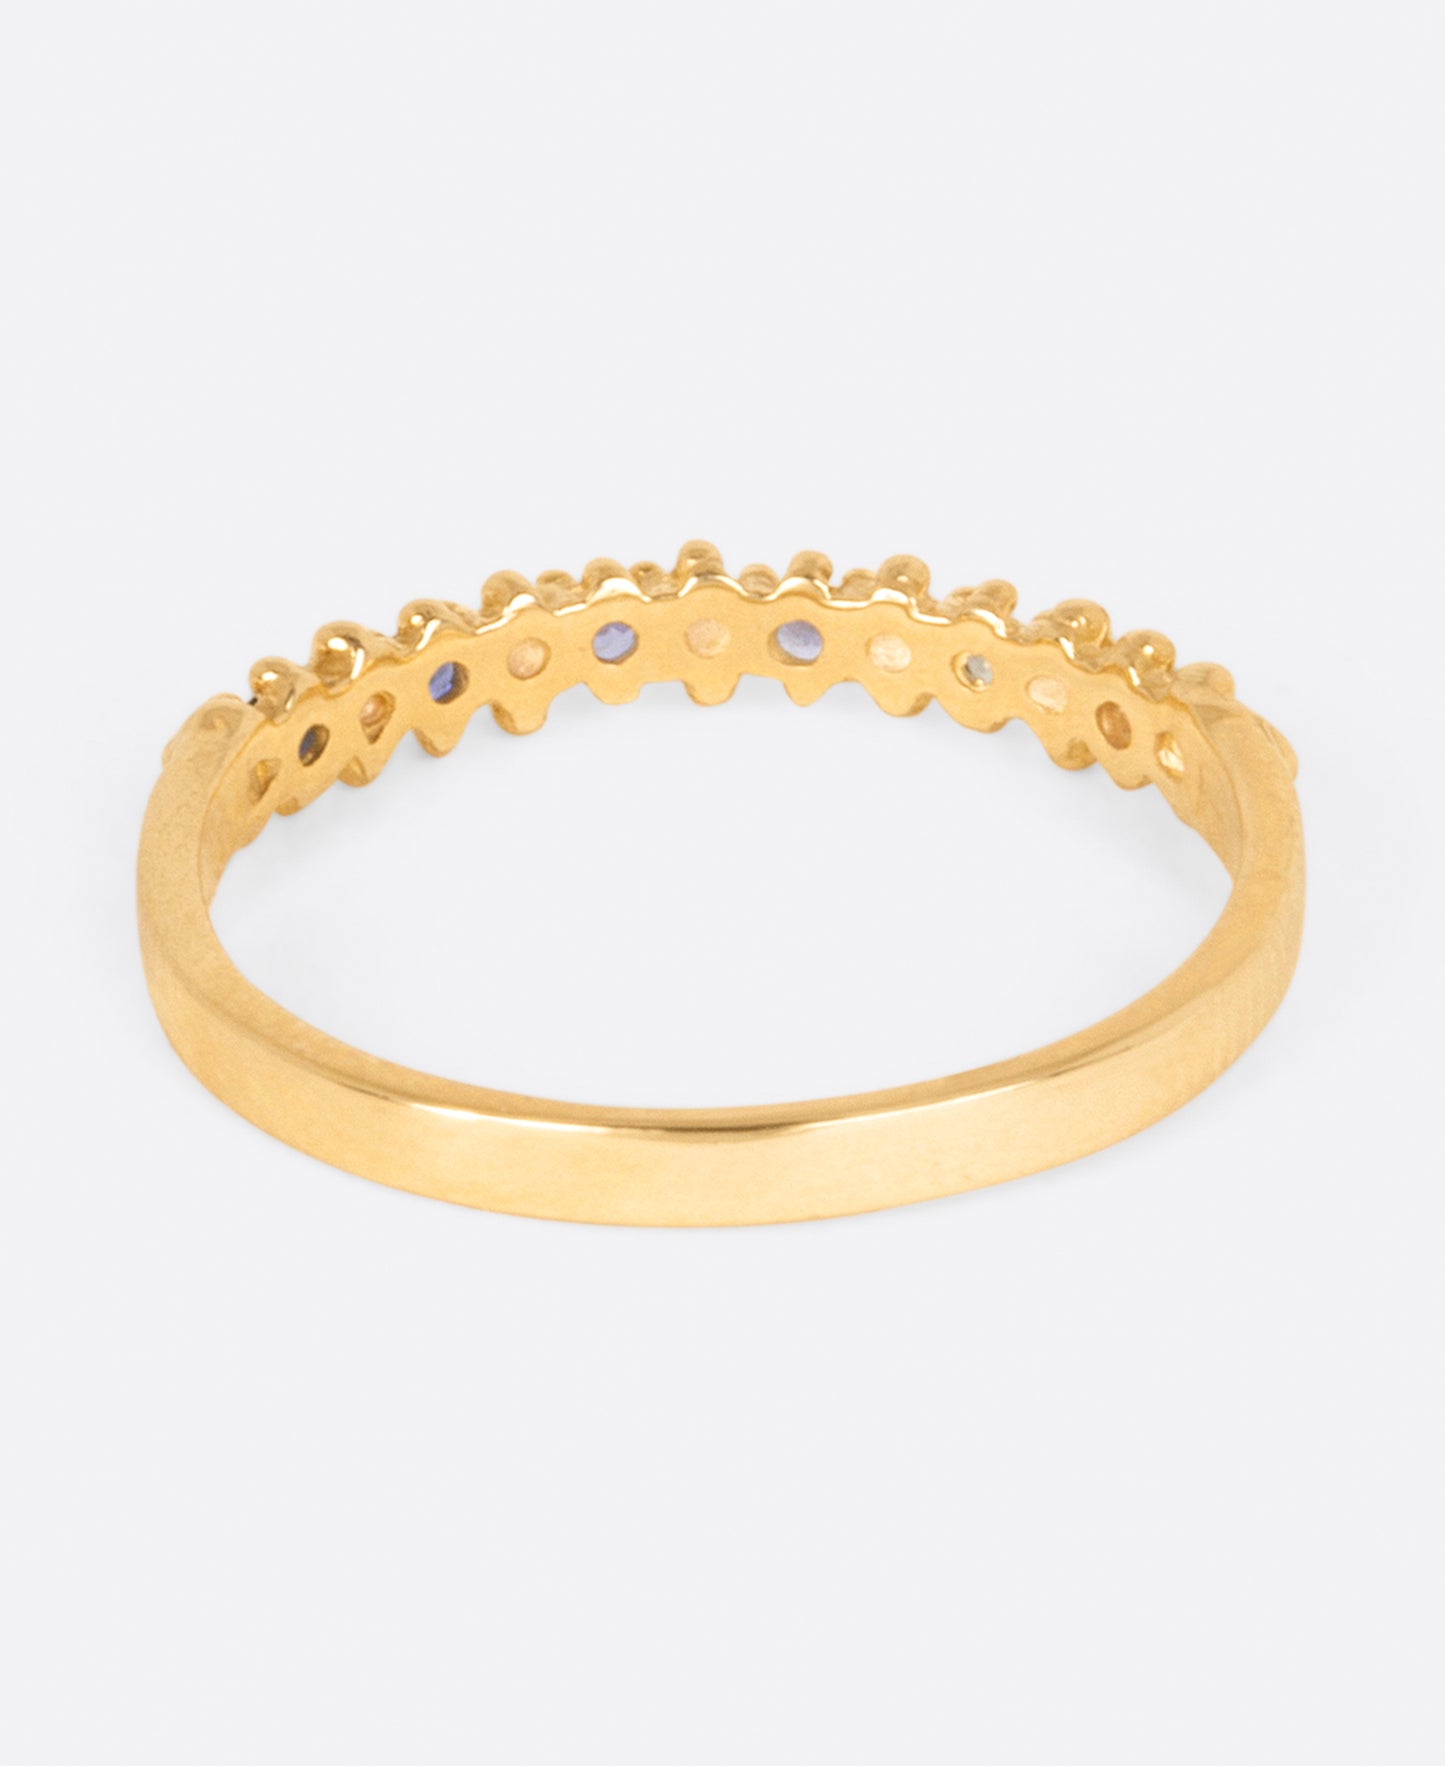 A textured yellow gold band with six sapphires in ombré order from white to dark blue, shown from the back.